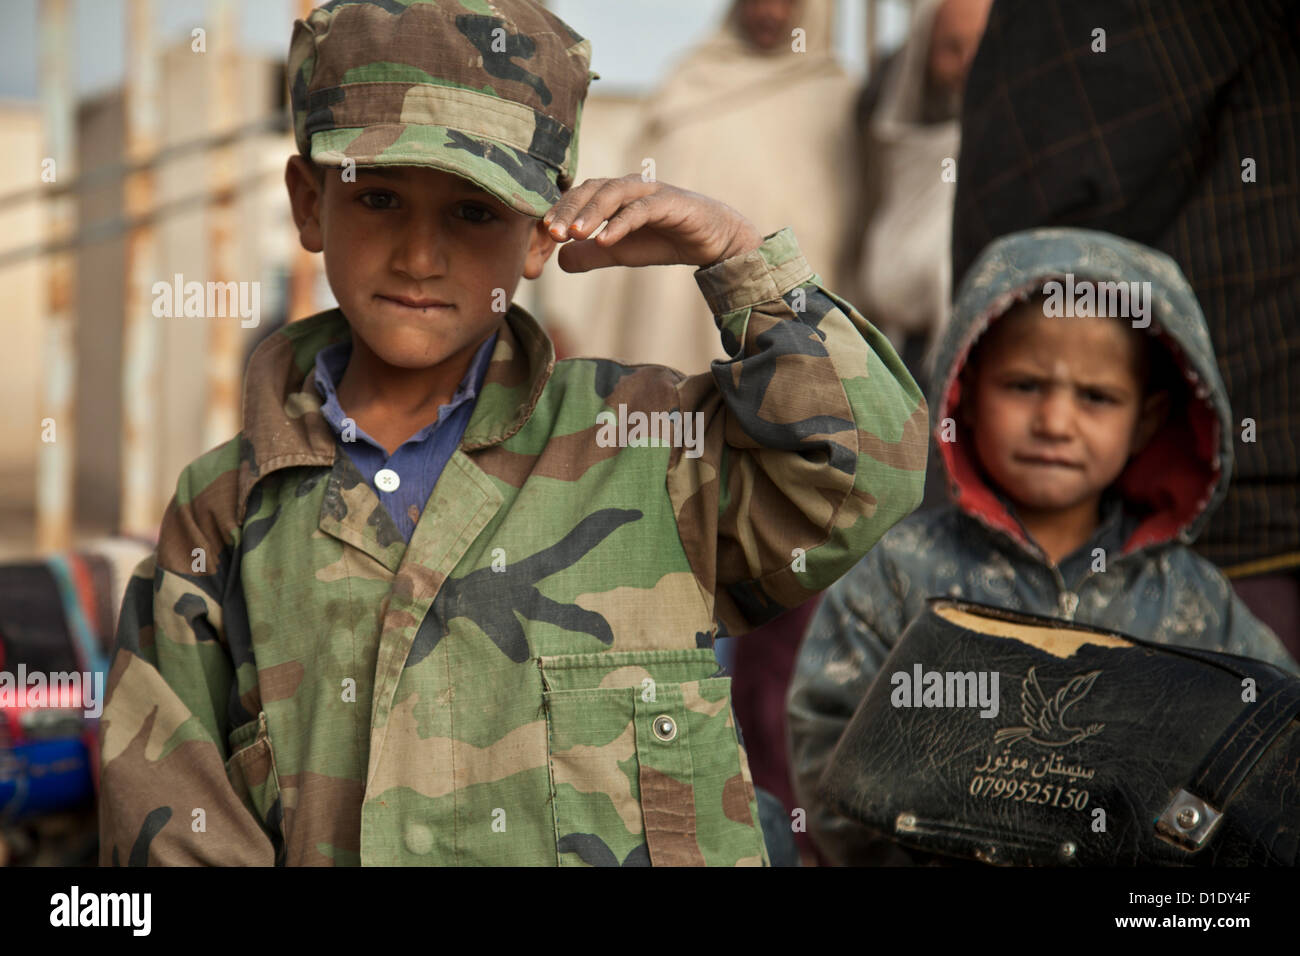 A Afghan boy salutes US Special Forces during a patrol December 16, 2012 in Farah province, Afghanistan. Stock Photo